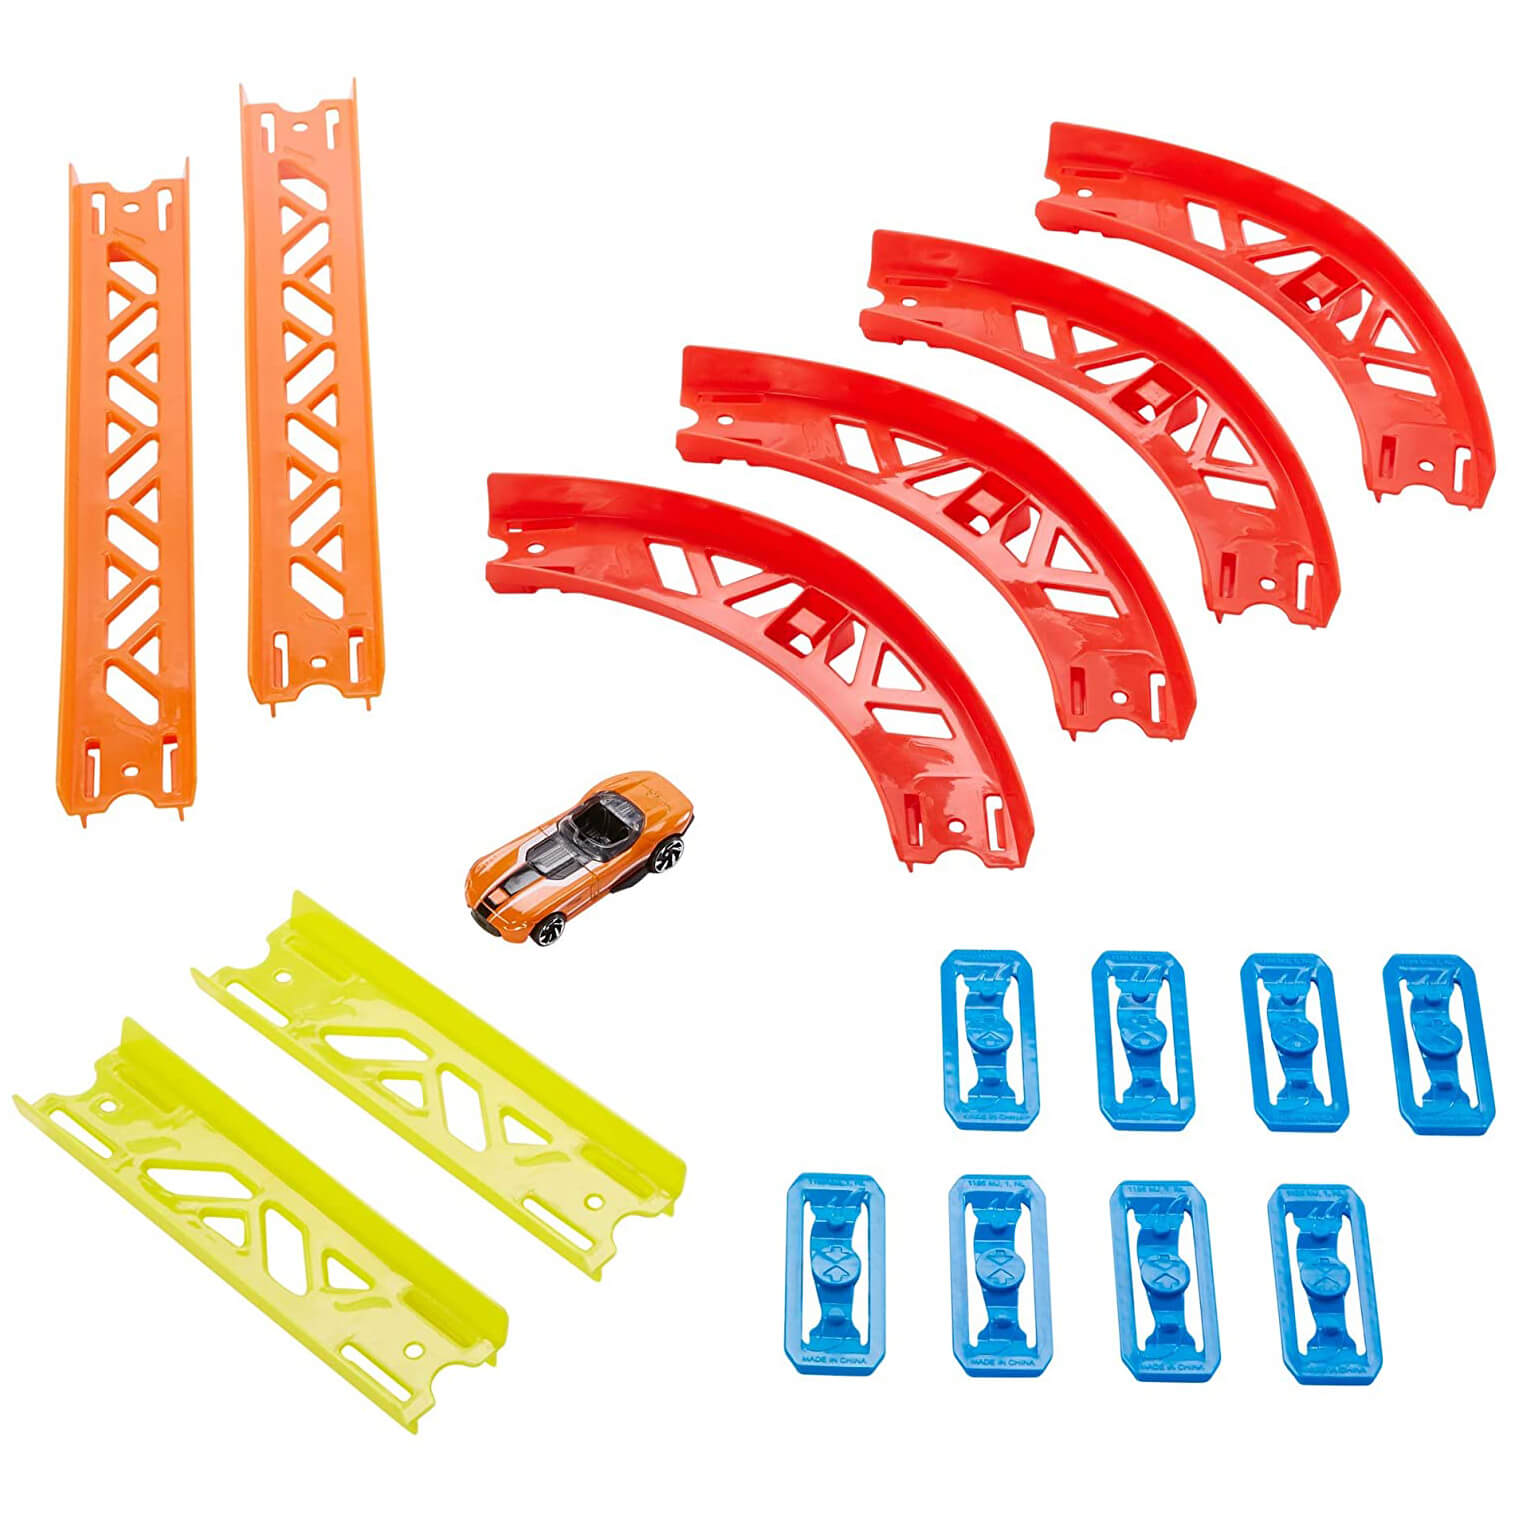 Hot Wheels Track Builder Unlimited Fuel Can Stunt Box and Vehicle